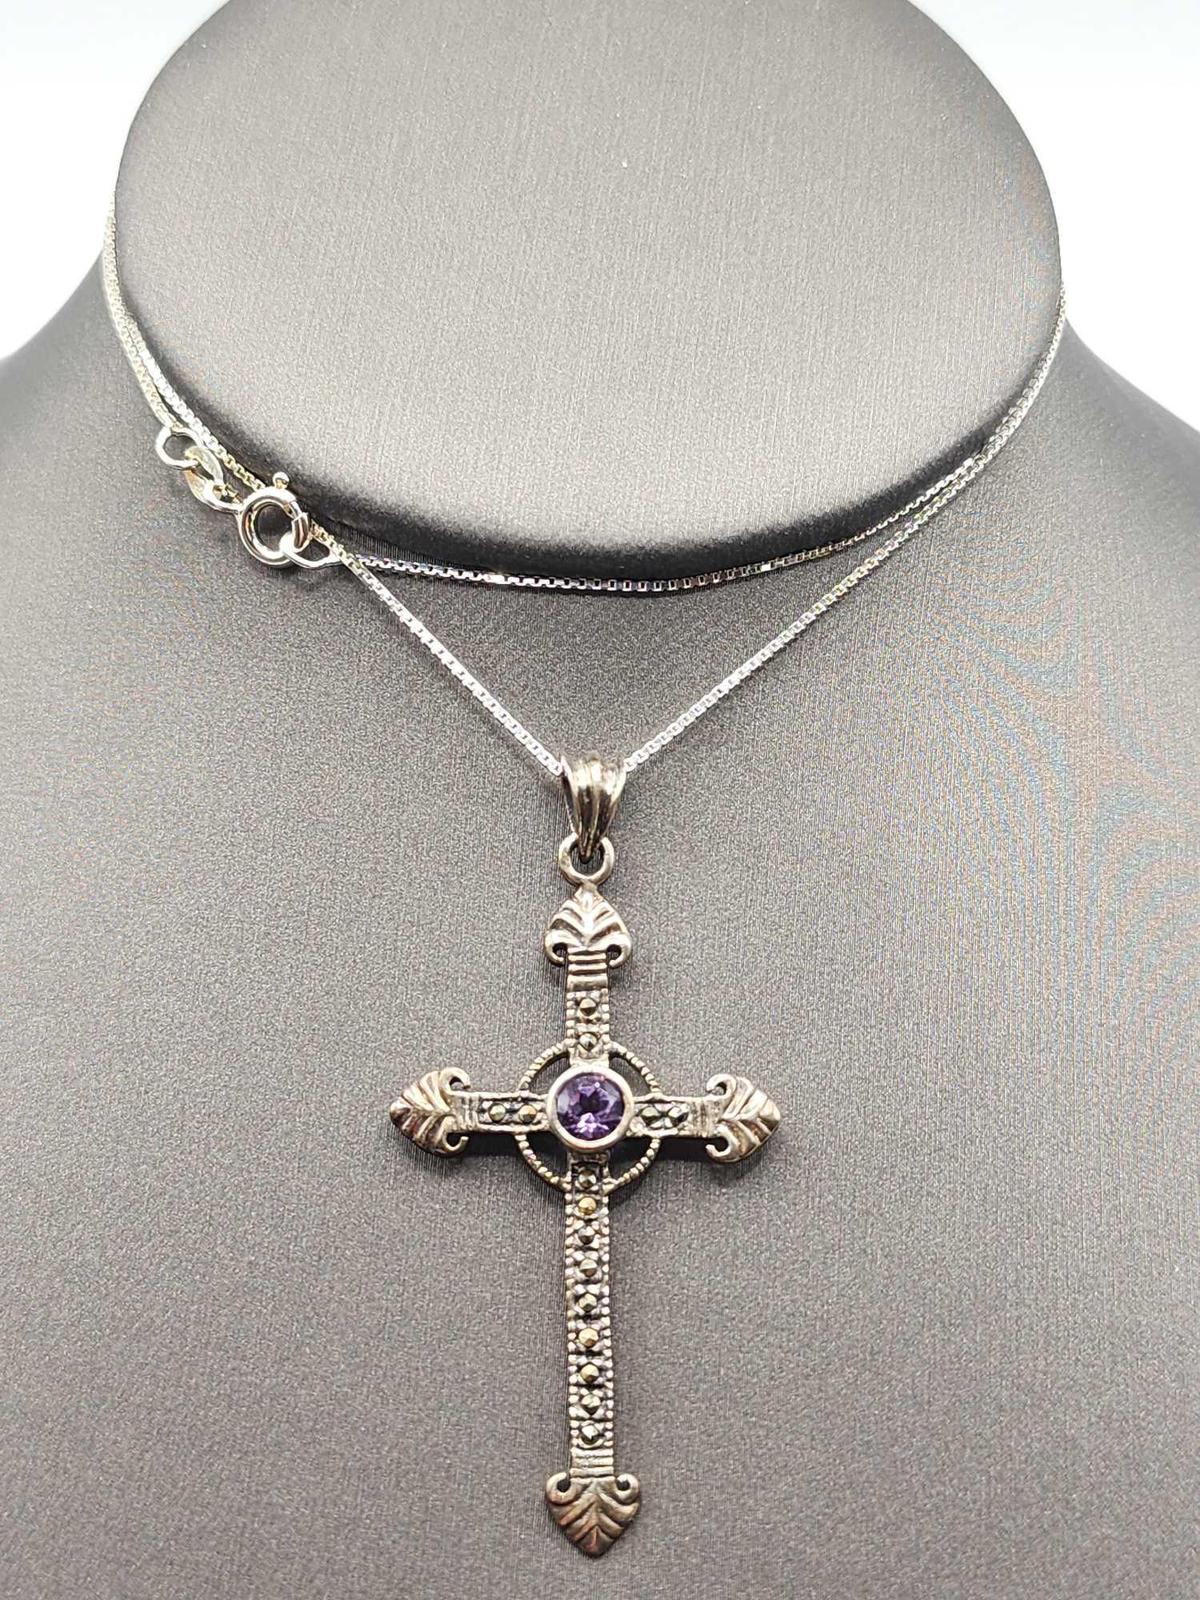 Sterling silver marcasite cross necklace